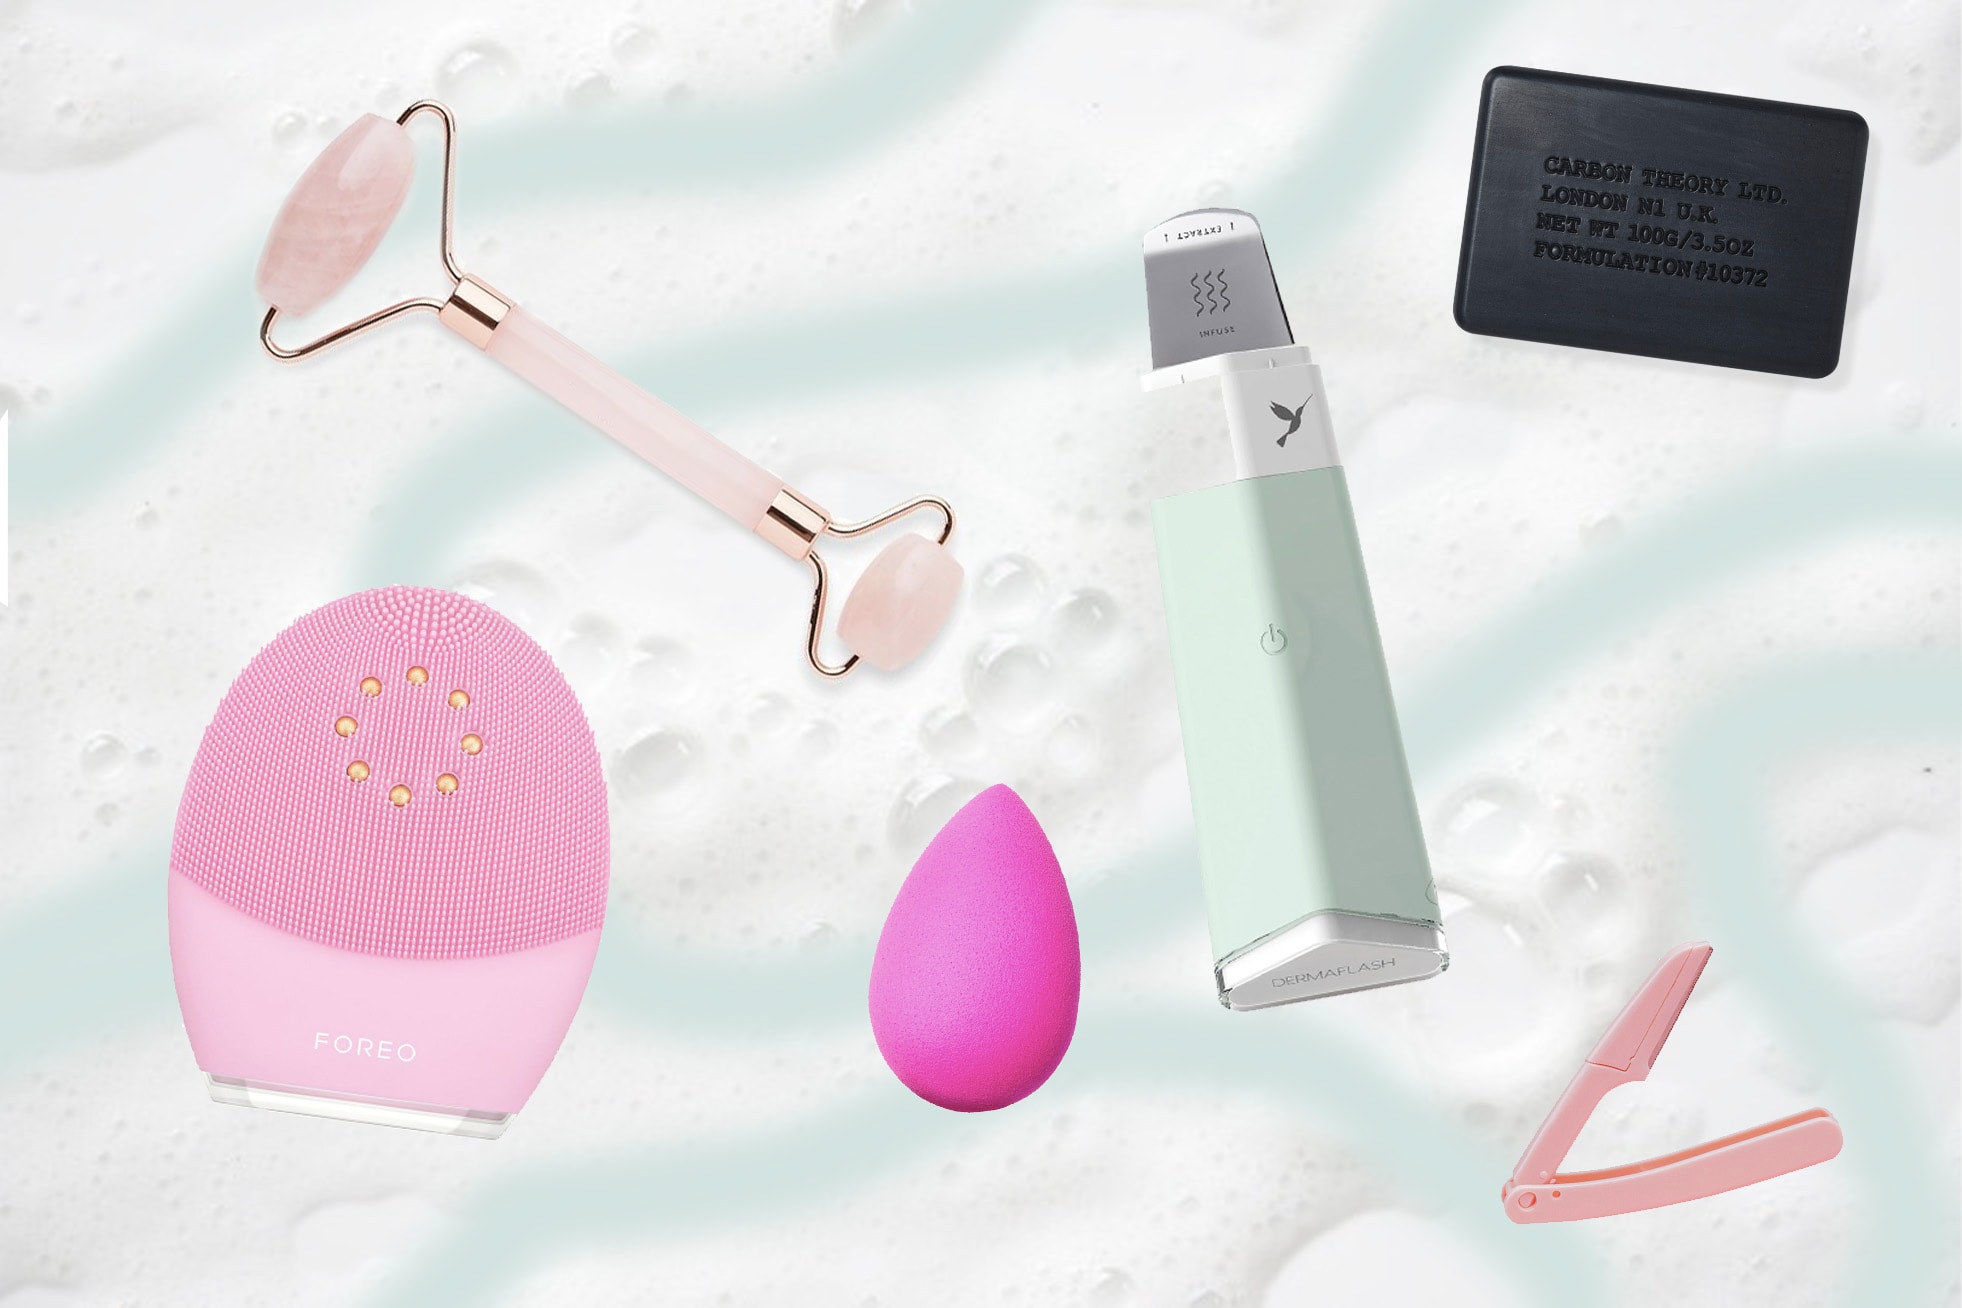 Best Cult Favorite Beauty Skincare Tools Worth Investing In Beautyblender Slip Silk Pillowcase Micro-Needling Roller Face Halo Makeup